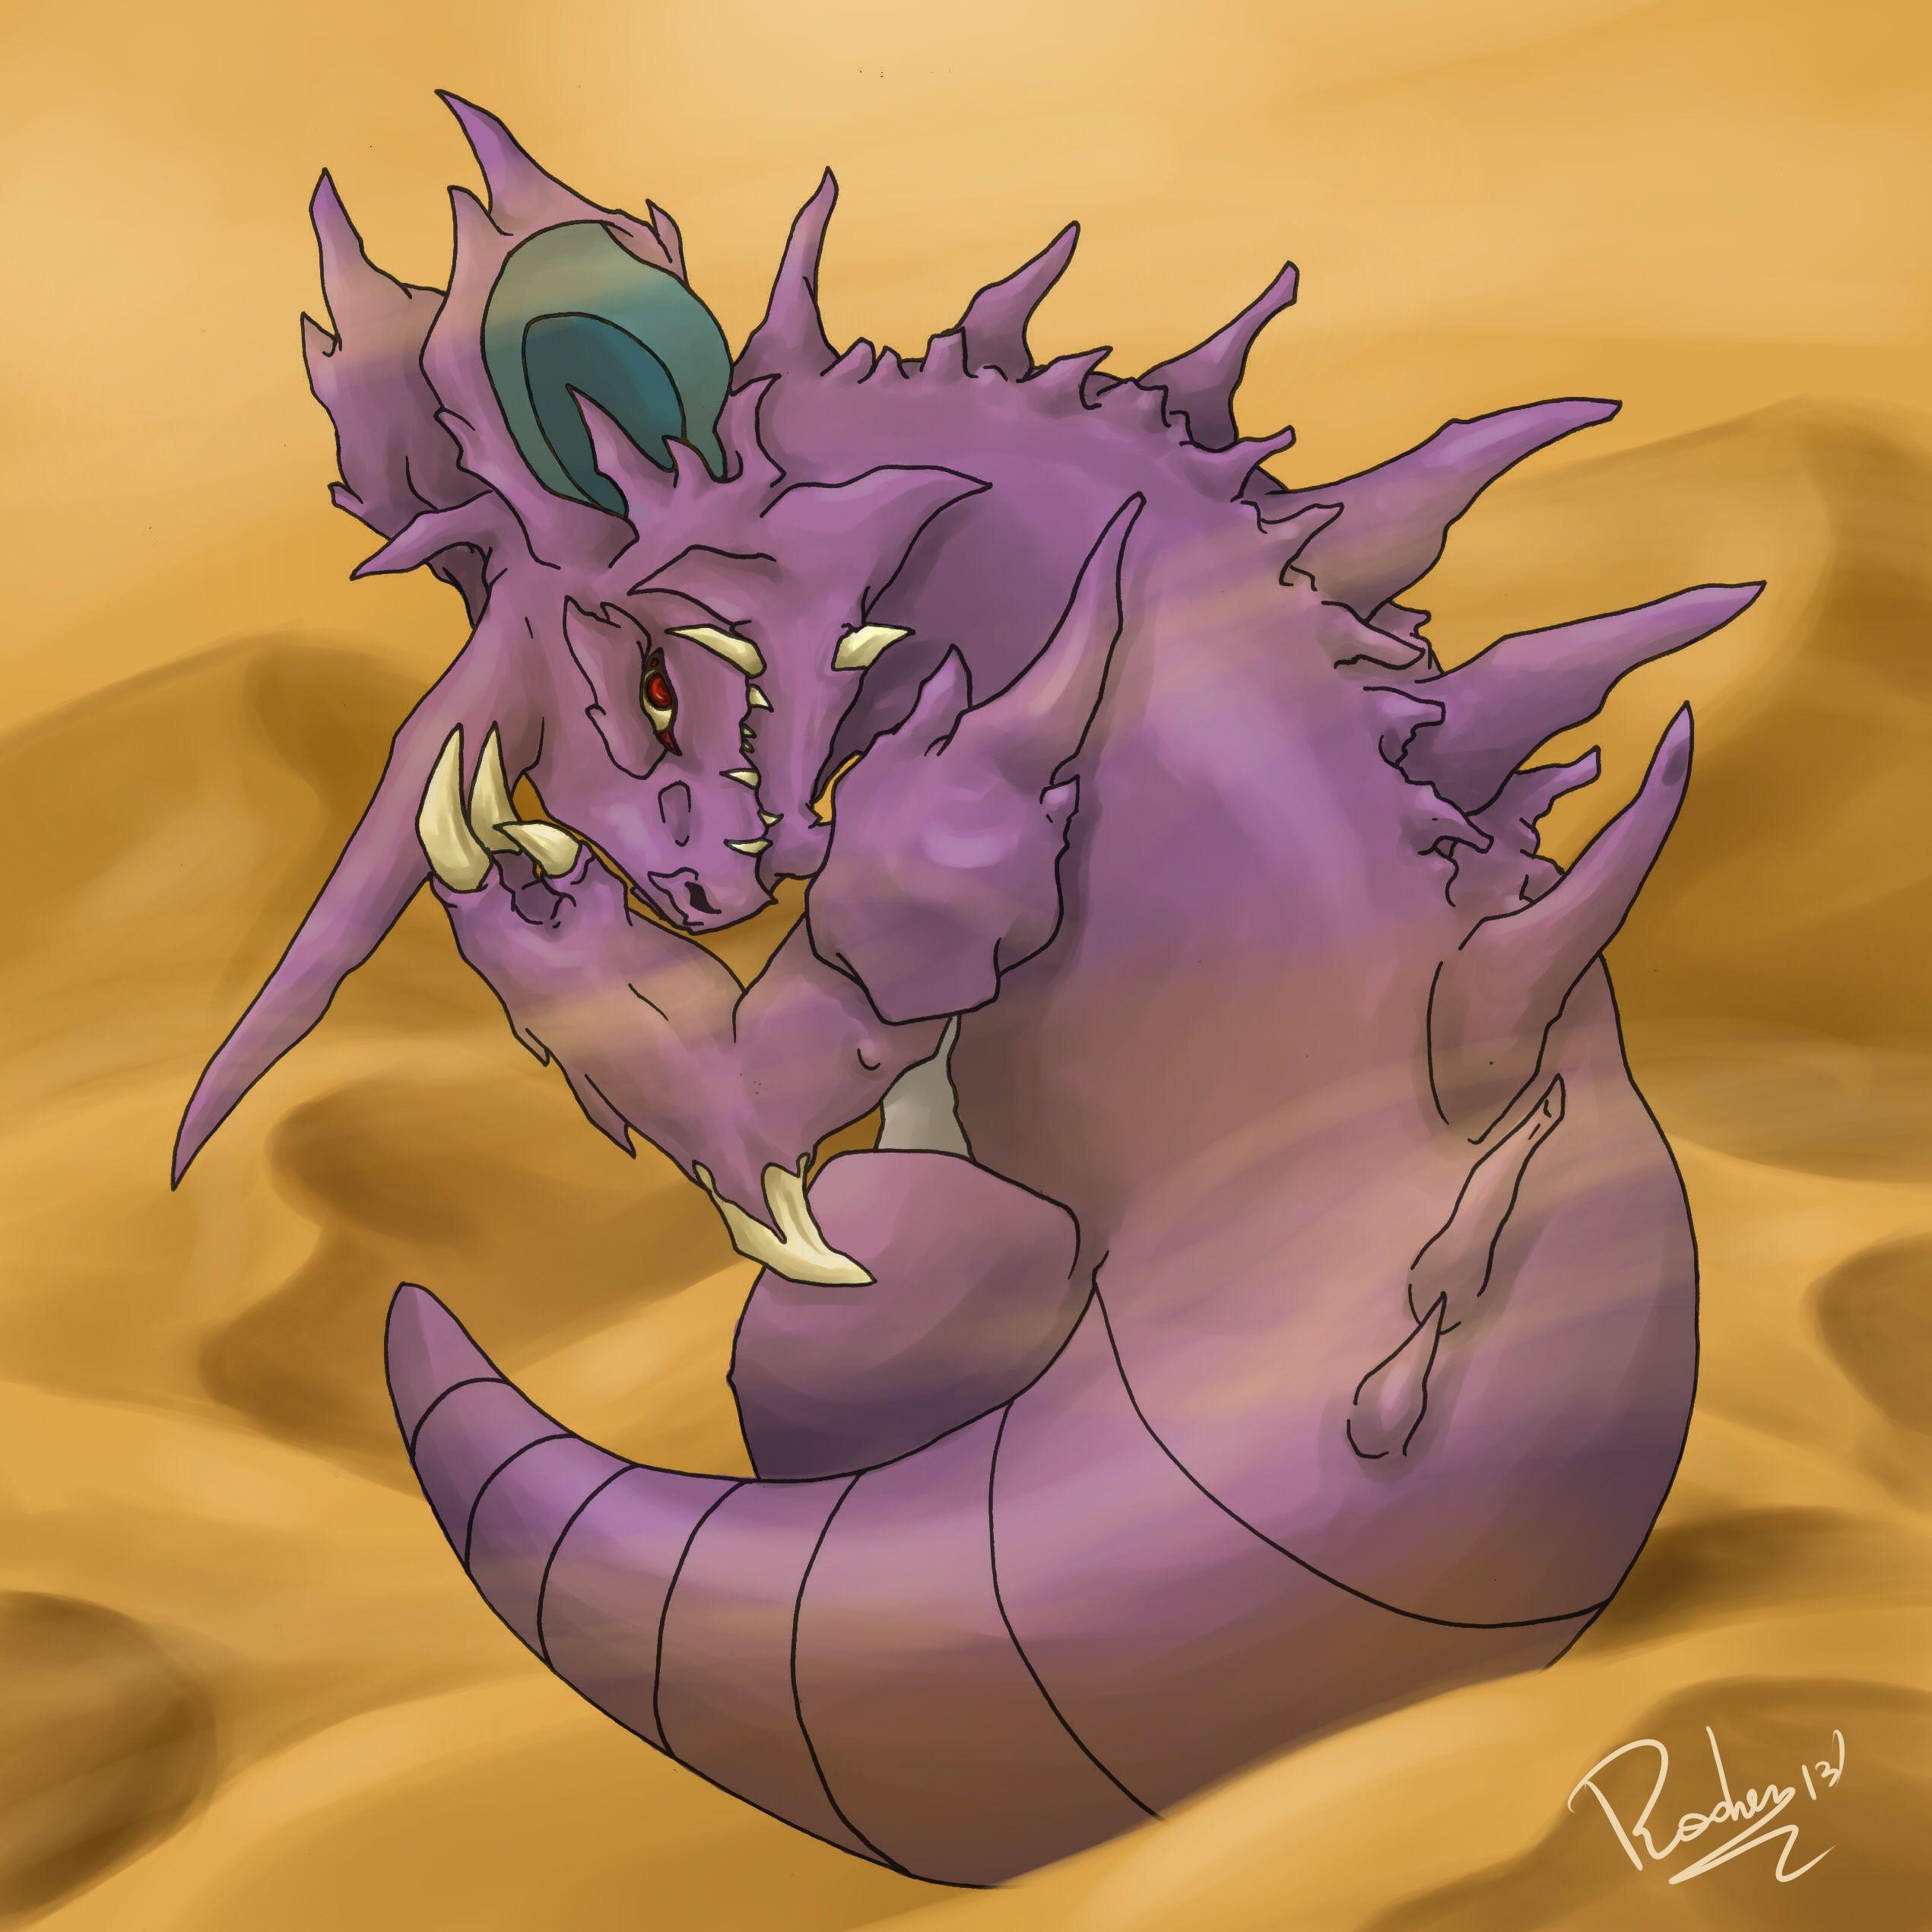 Nidoking by Radven